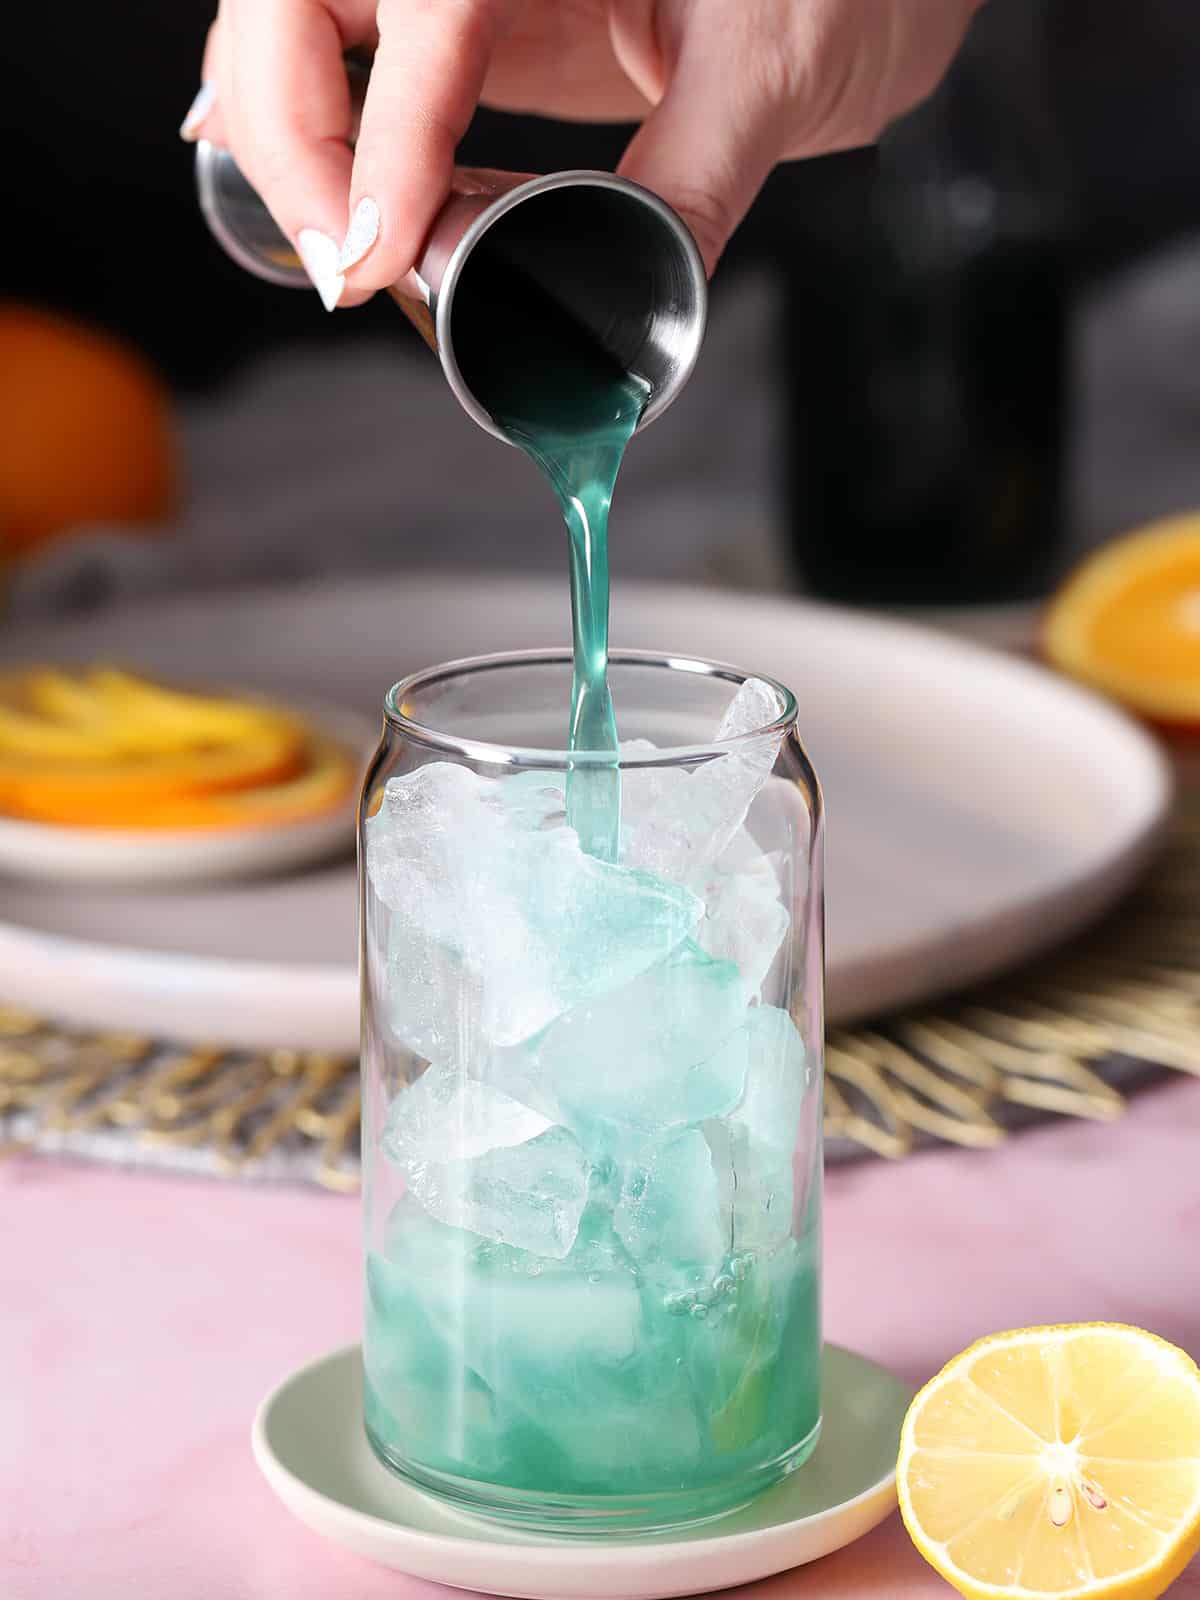 Blue curacao syrup being poured into a glass filled with ice.